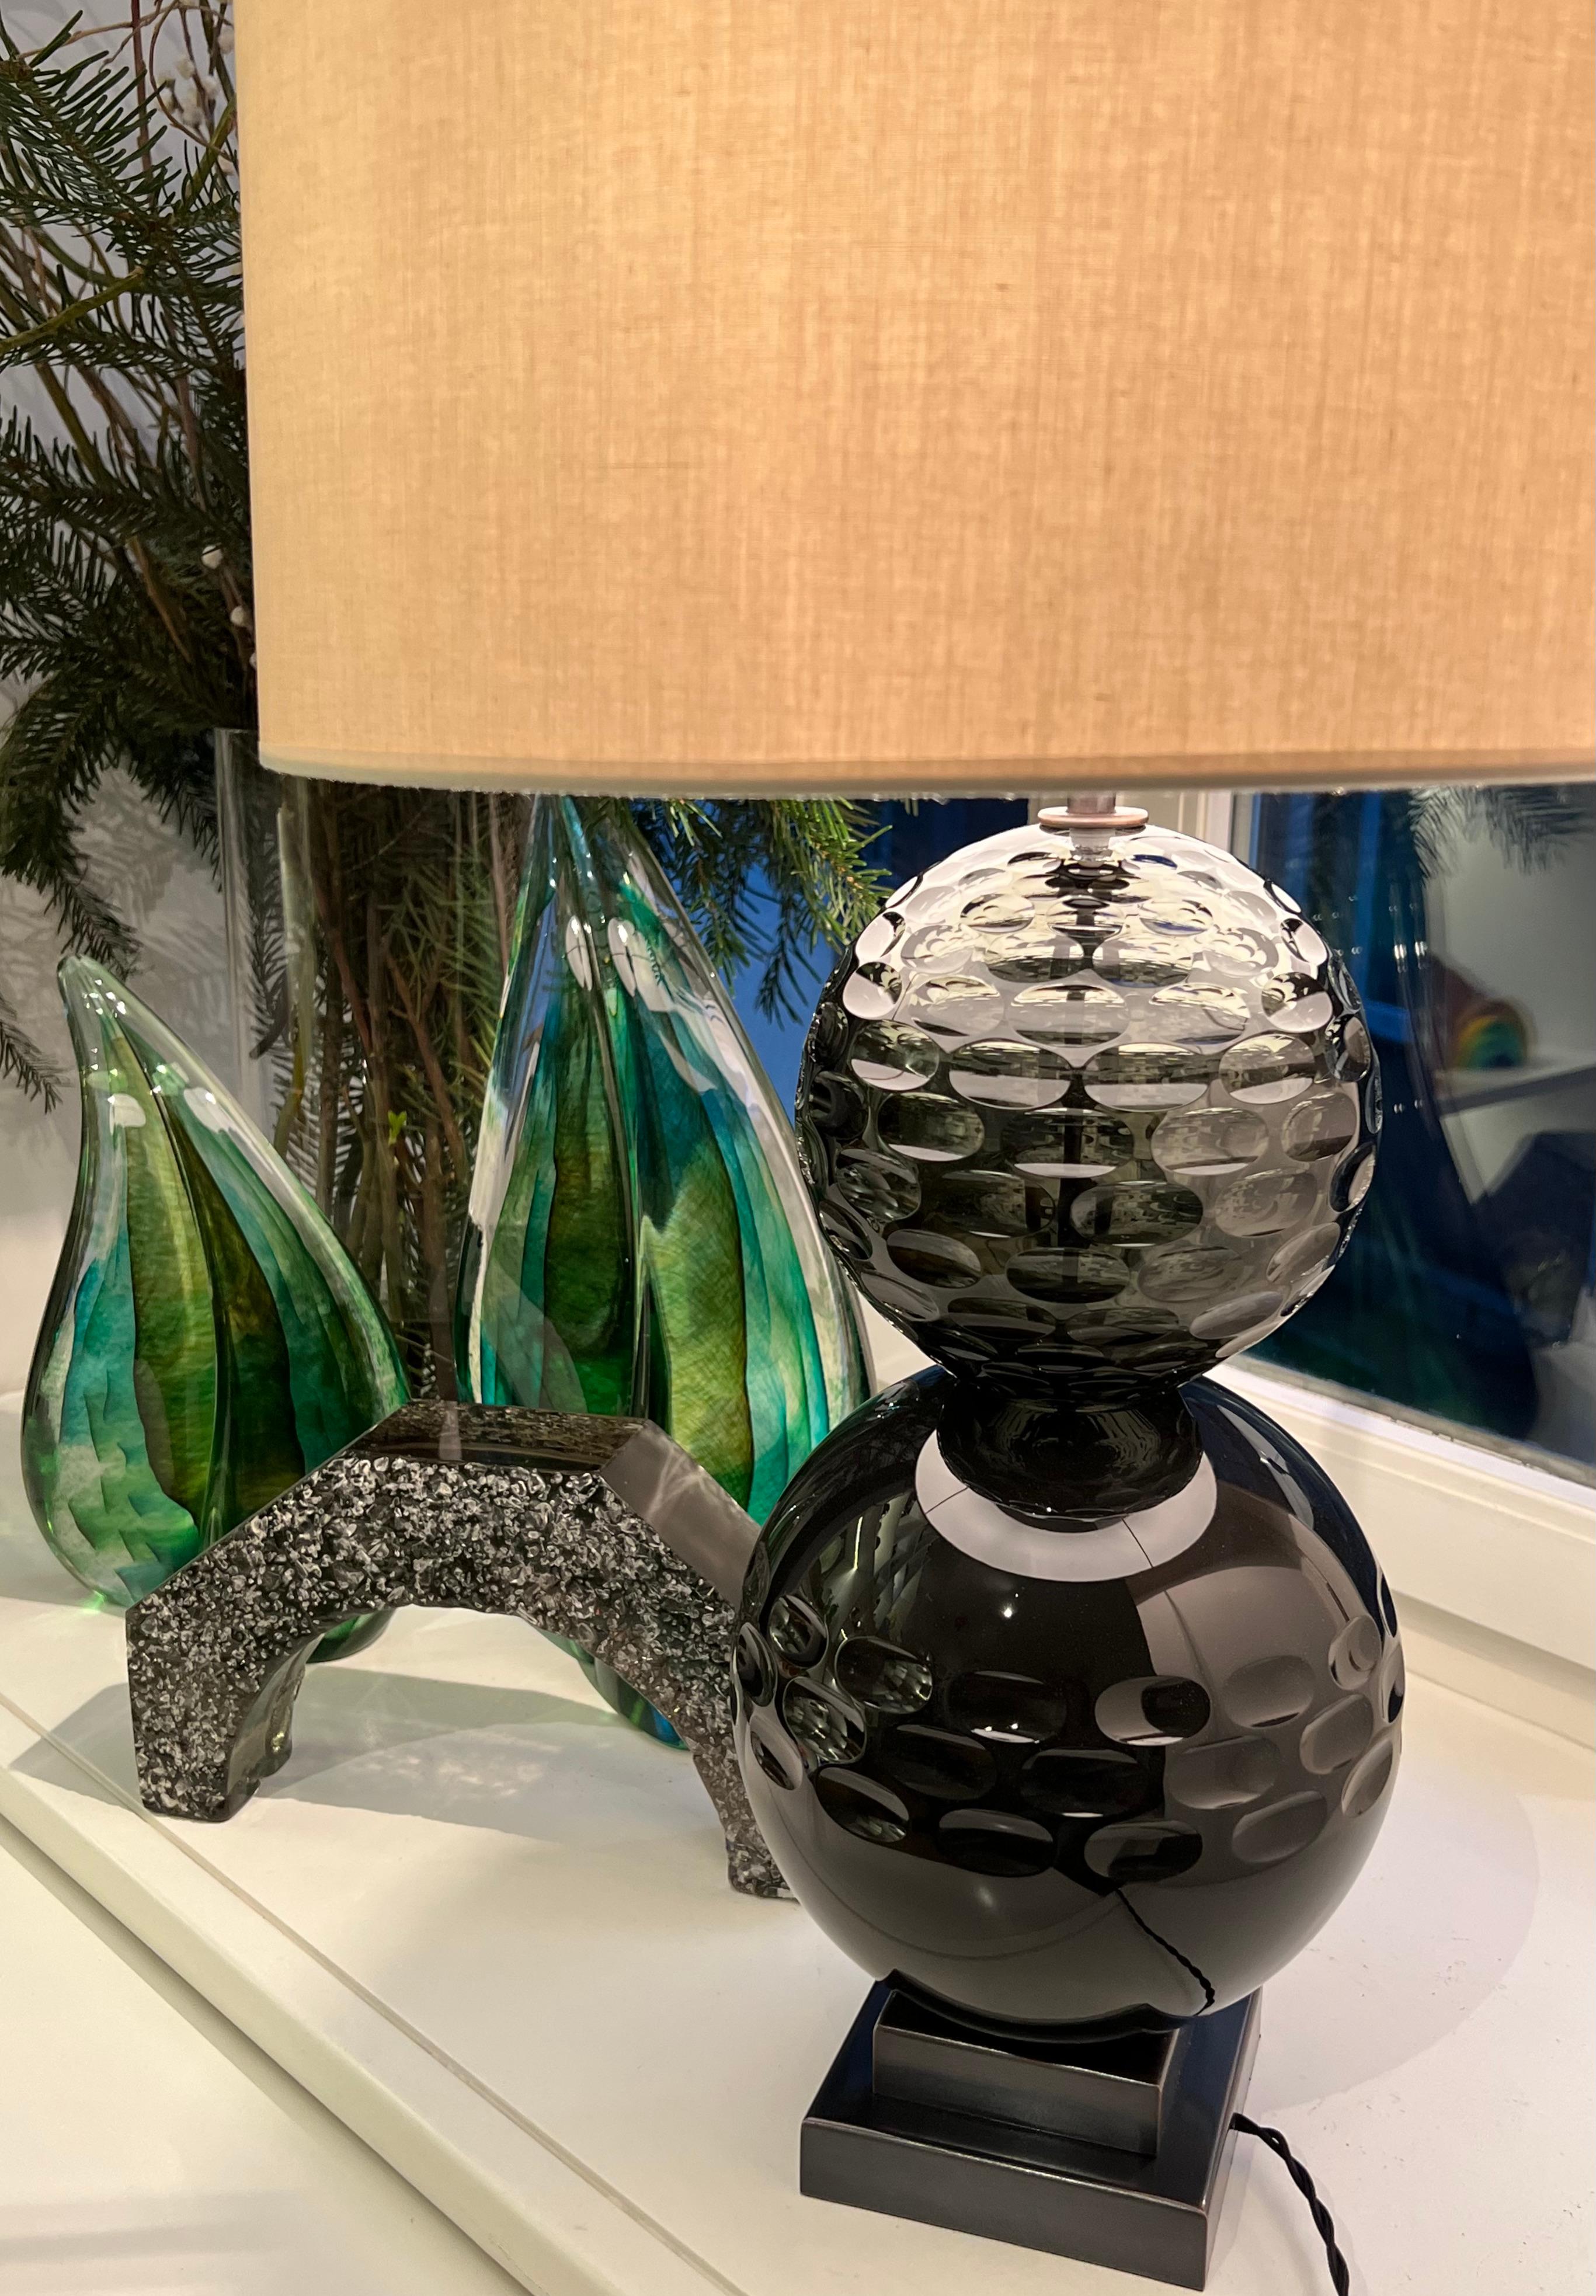 Introducing our exquisite gray and black glass globes, each meticulously mouth blown and hand carved to perfection. With diameters of approximately 20 cm and 16 cm, these striking globes become the focal point in any interior, radiating elegance and